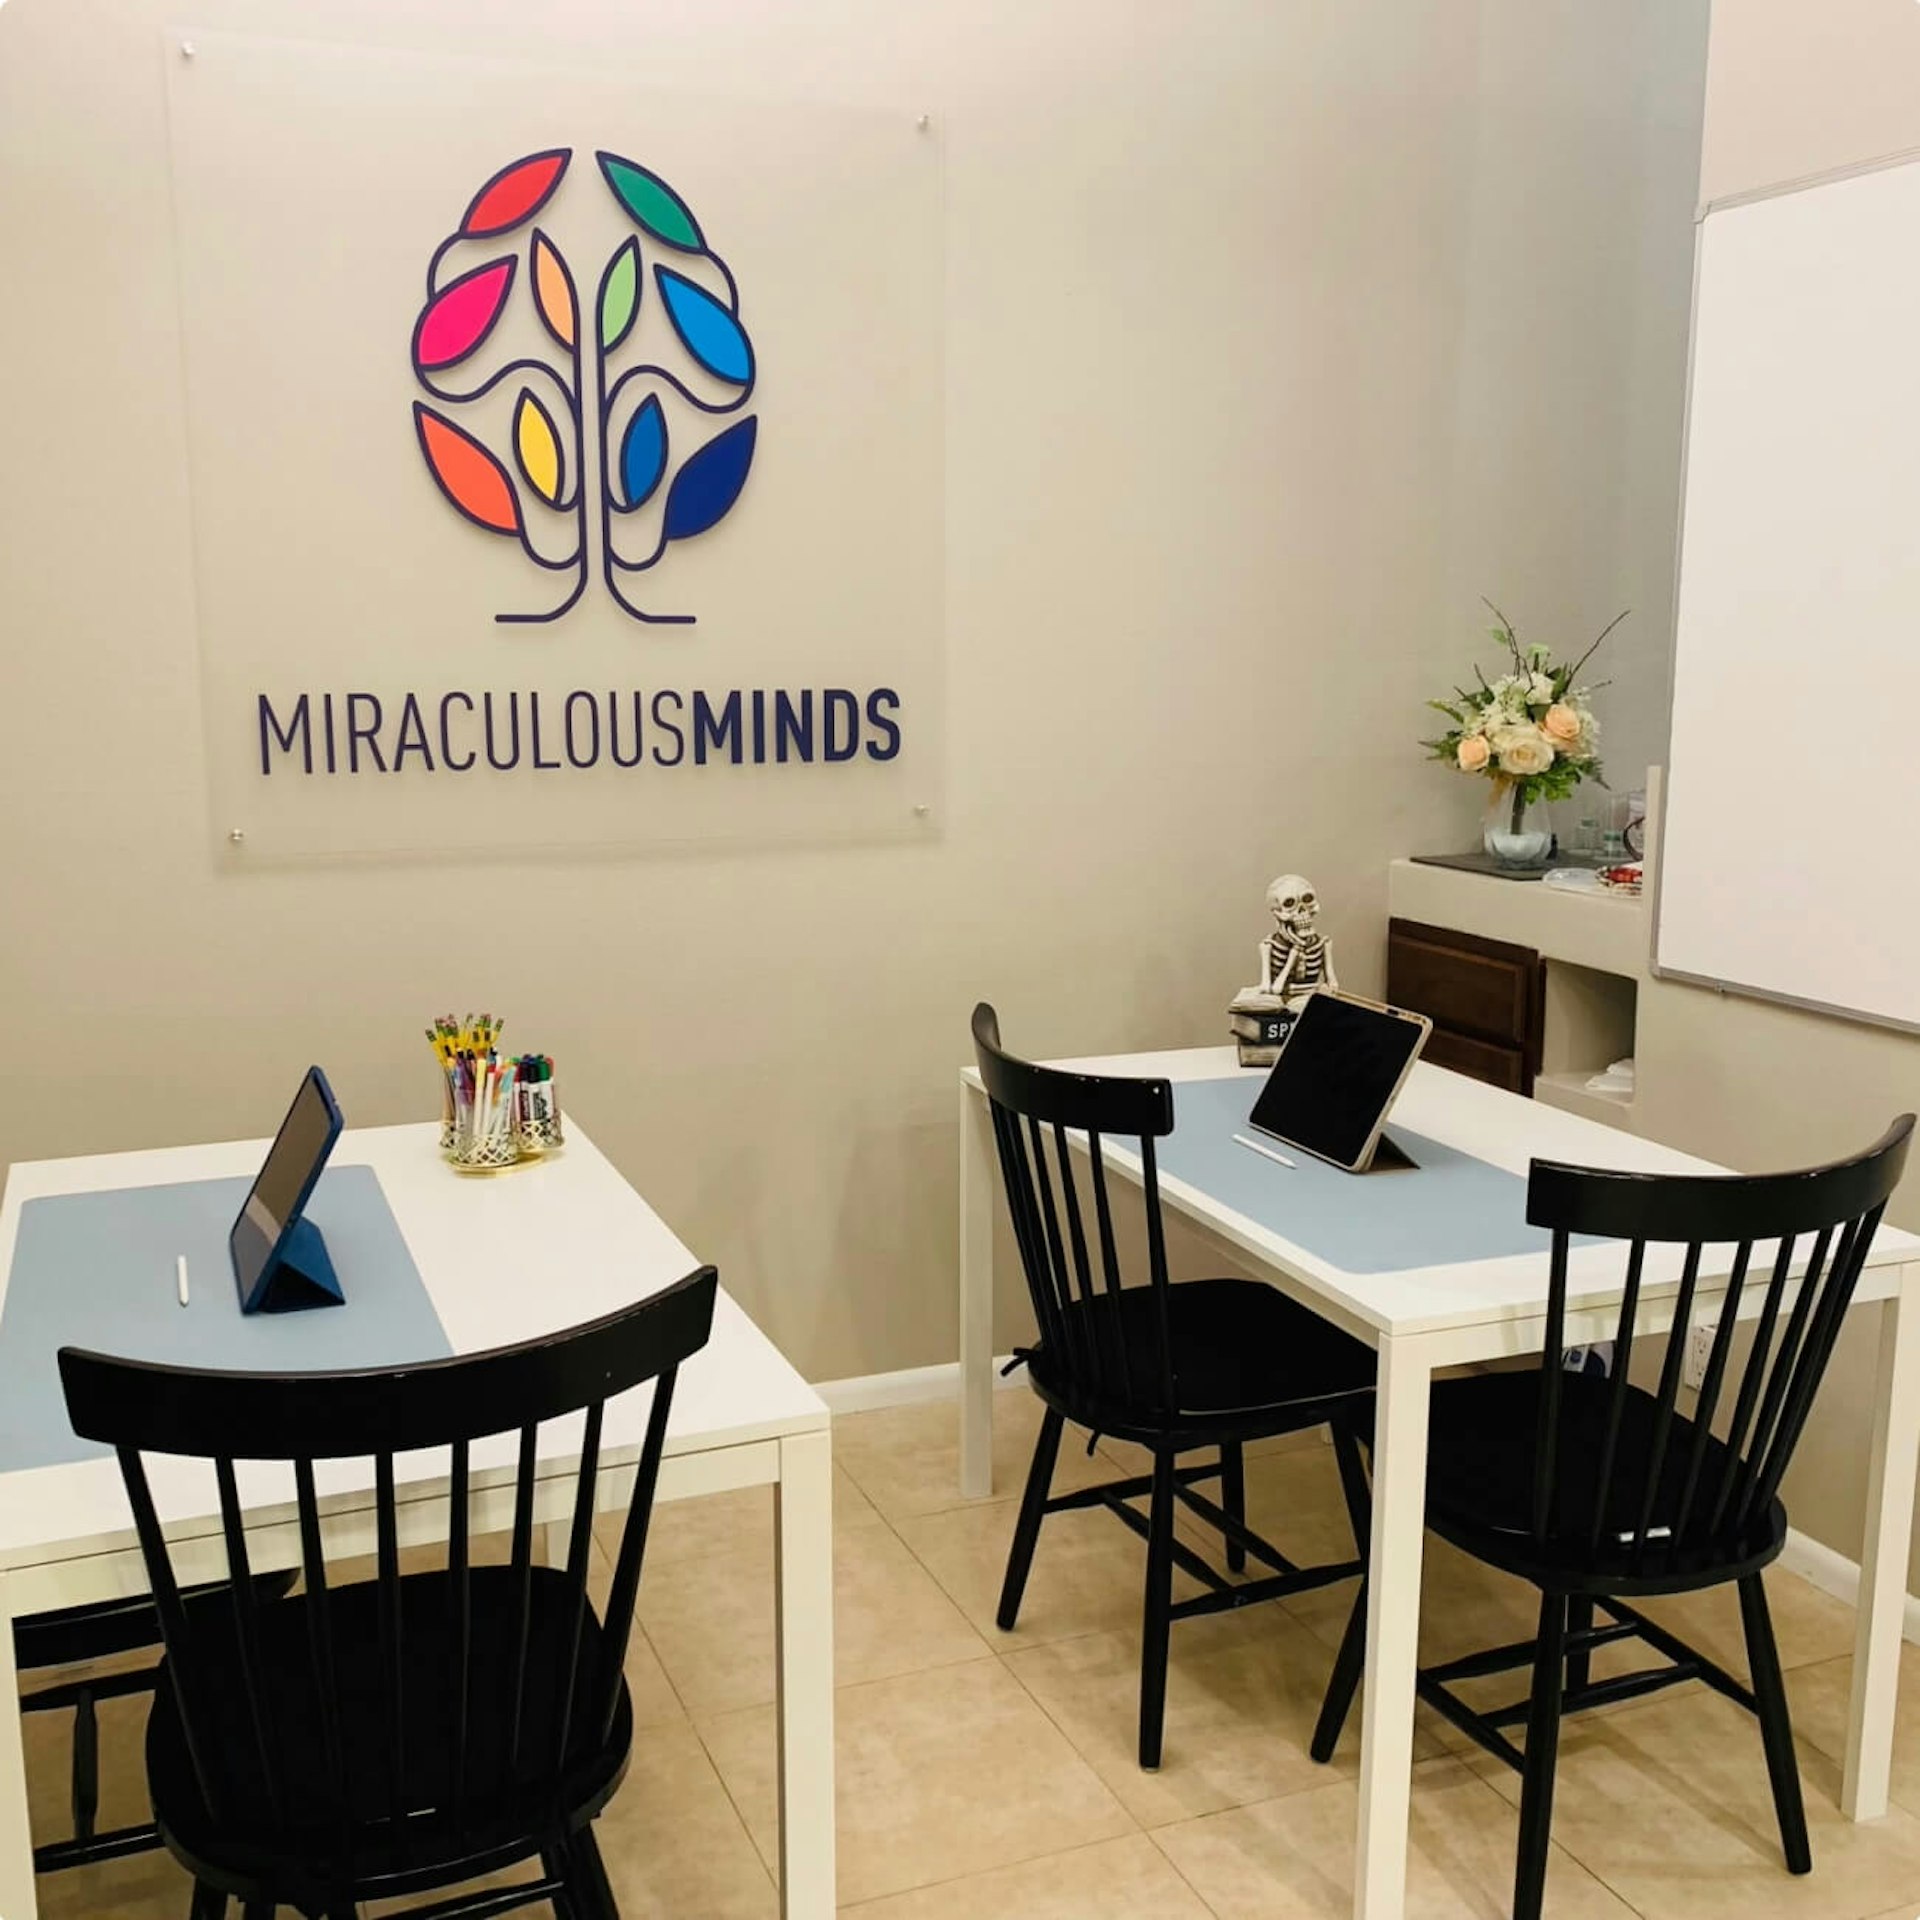 A tutoring classroom with a sign of “Miraculous Minds” logo on the wall.